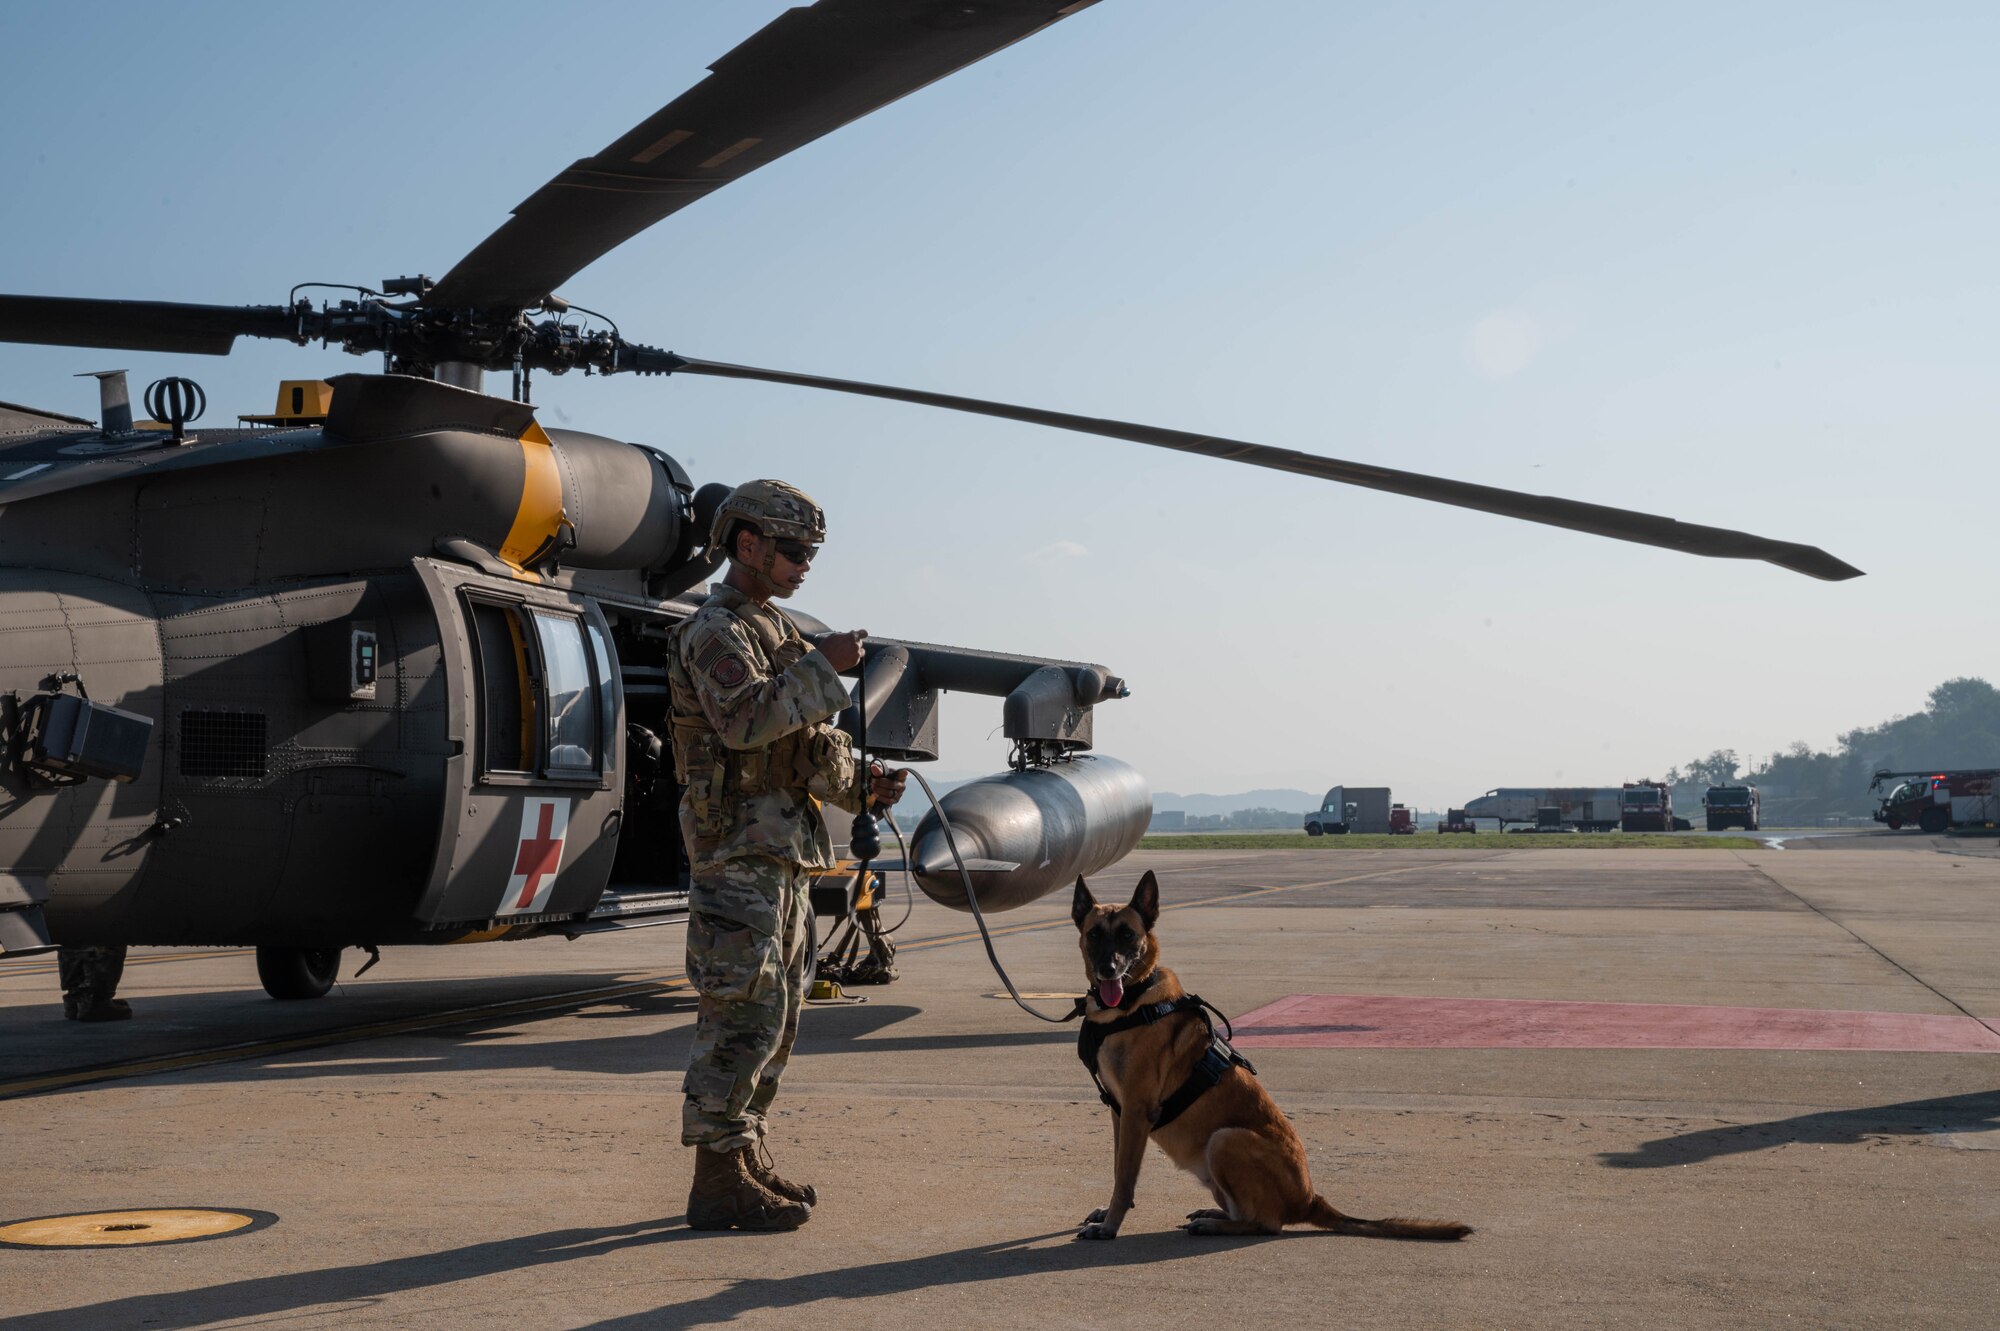 Staff Sgt. Kyle Ashton Young, 51st Security Forces squadron, military working dog handler, prepares MWD Afrika to board a U.S. Army HH-60 Black hawk